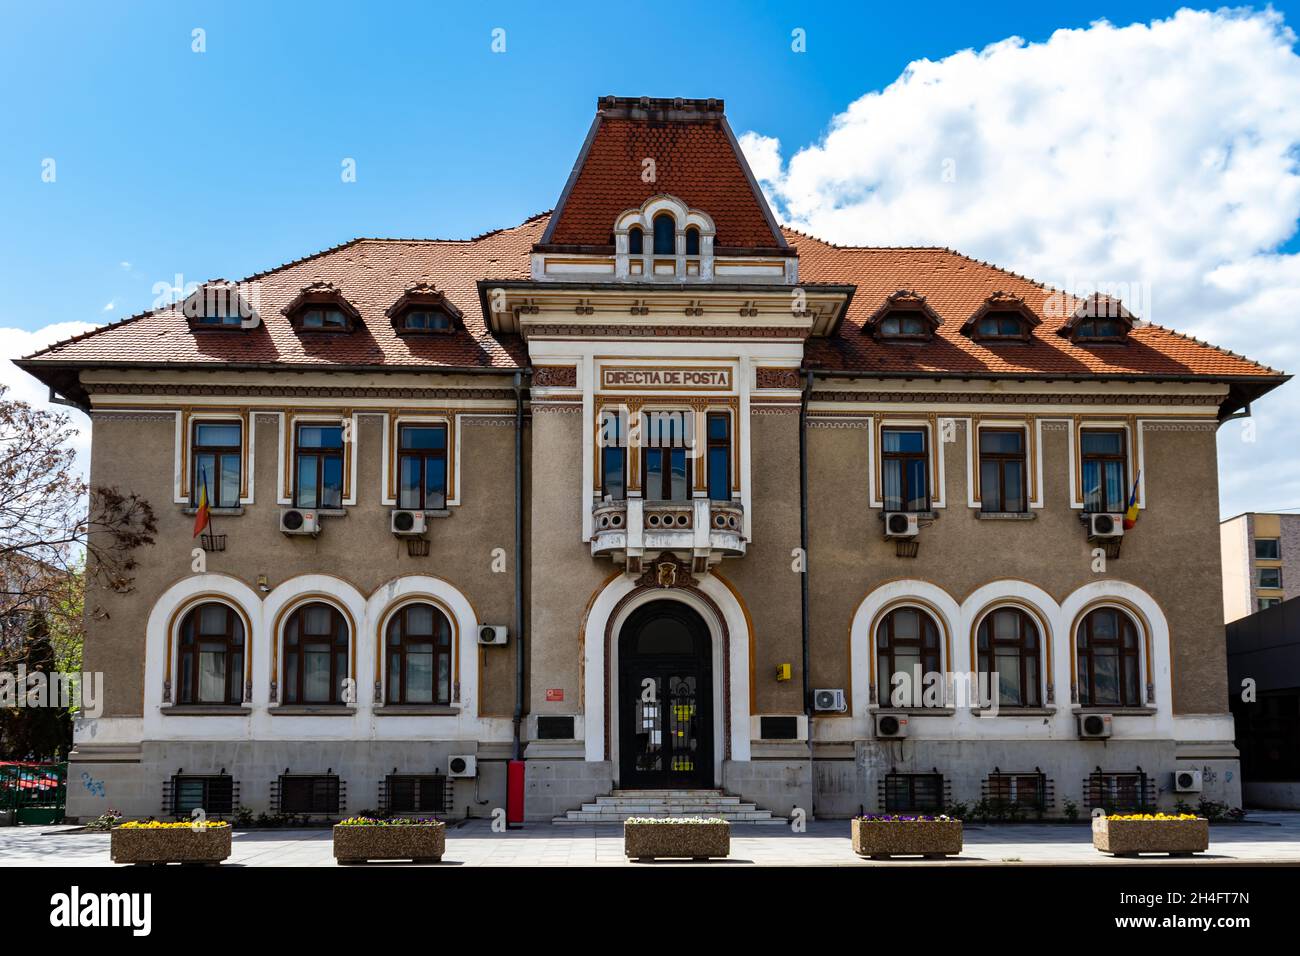 Bacau, Romania, May 02, 2021: Photo in front of the symmetrical Post Office building, which has 2 Romanian flags on the windows Stock Photo